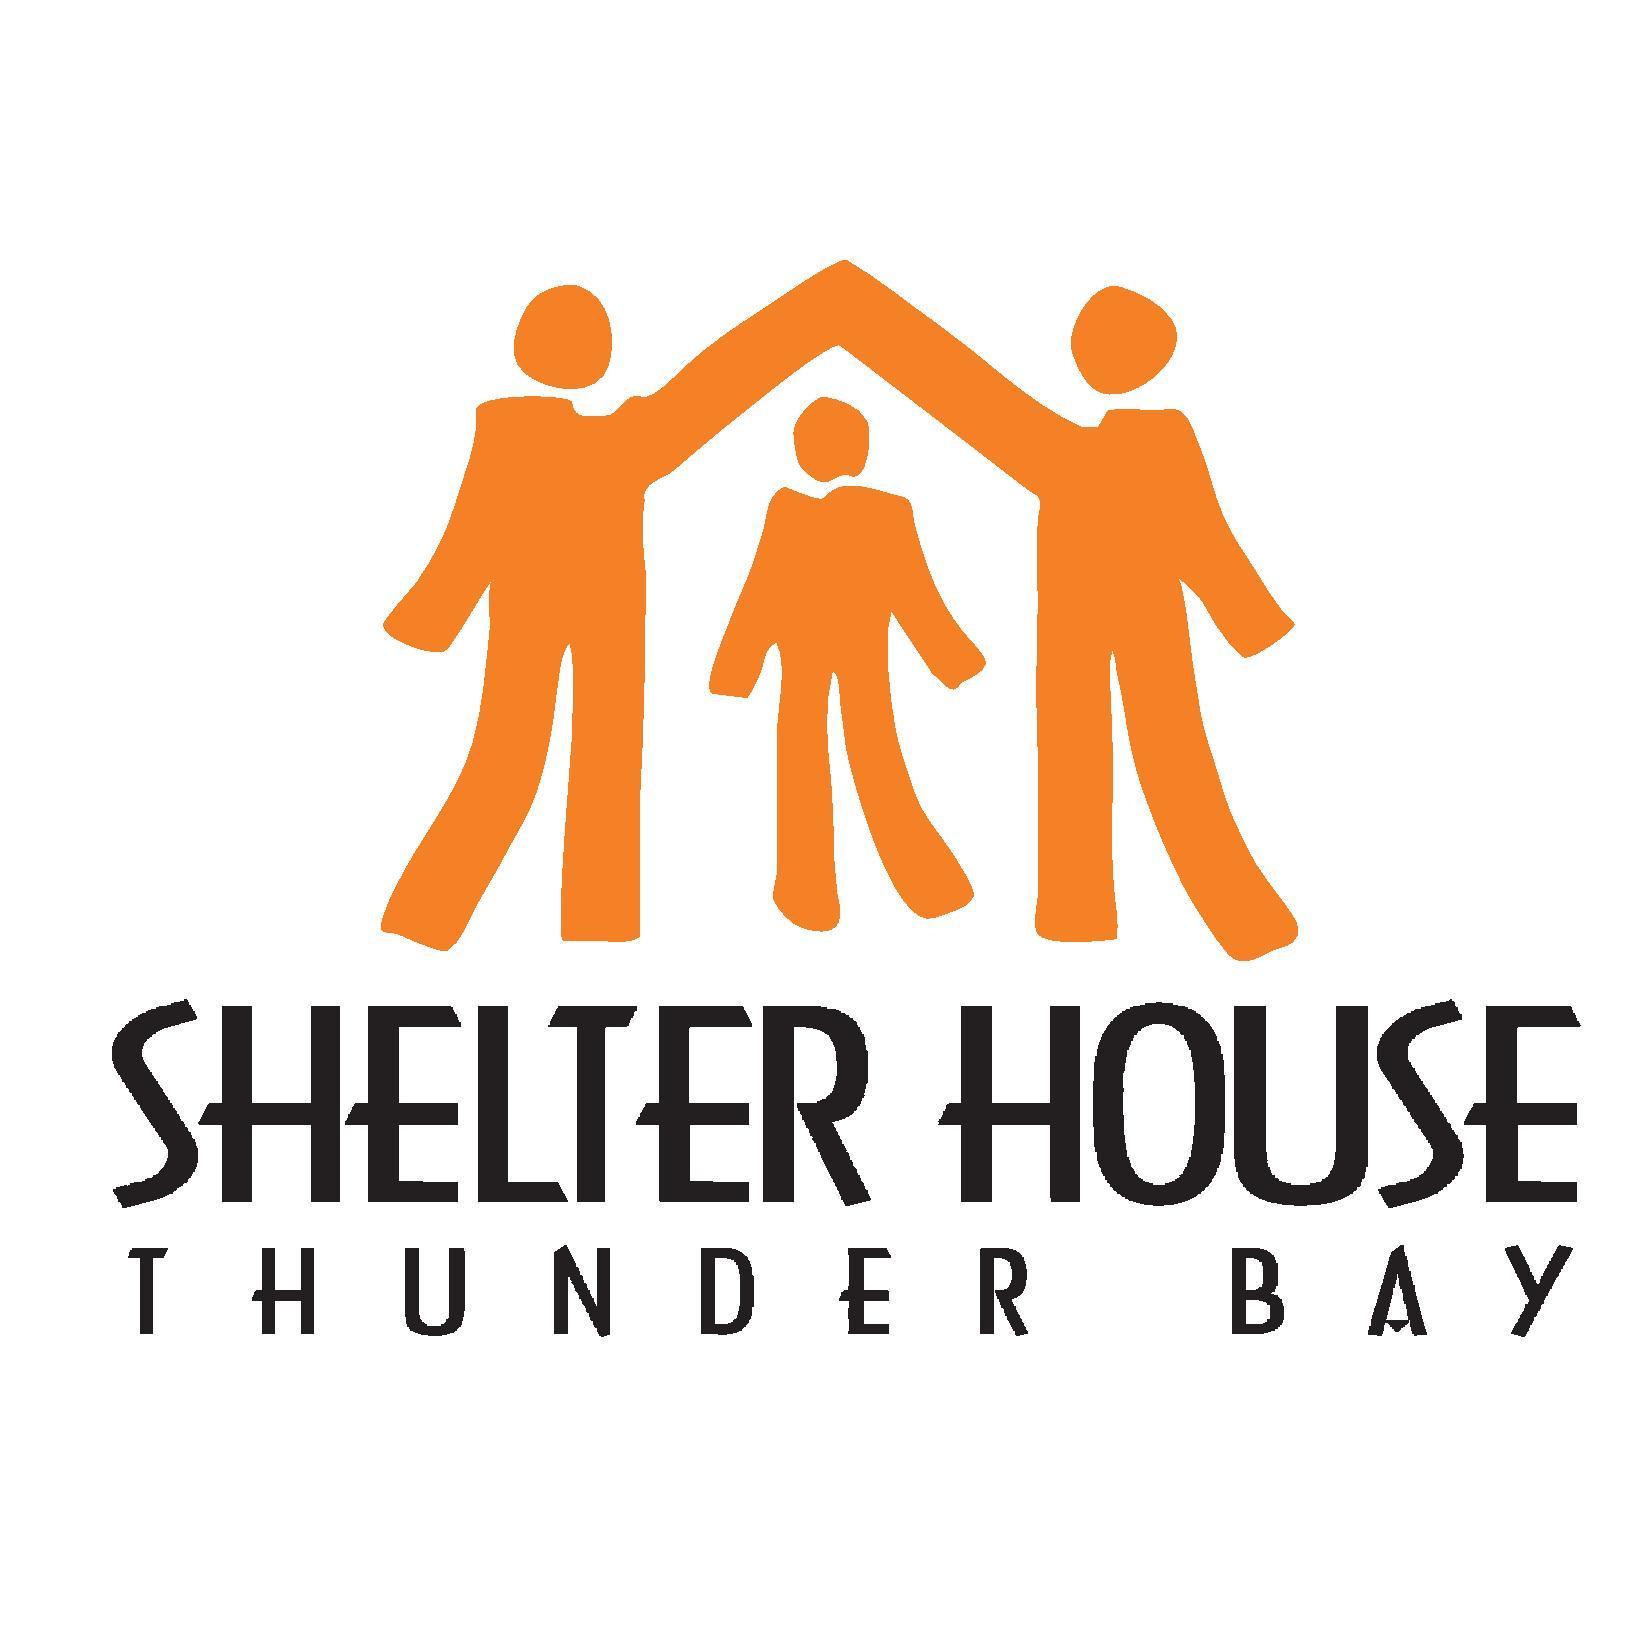 Shelter House provides basic needs, dignity and comfort to people living in poverty and stimulates action to address the root causes of homelessness.